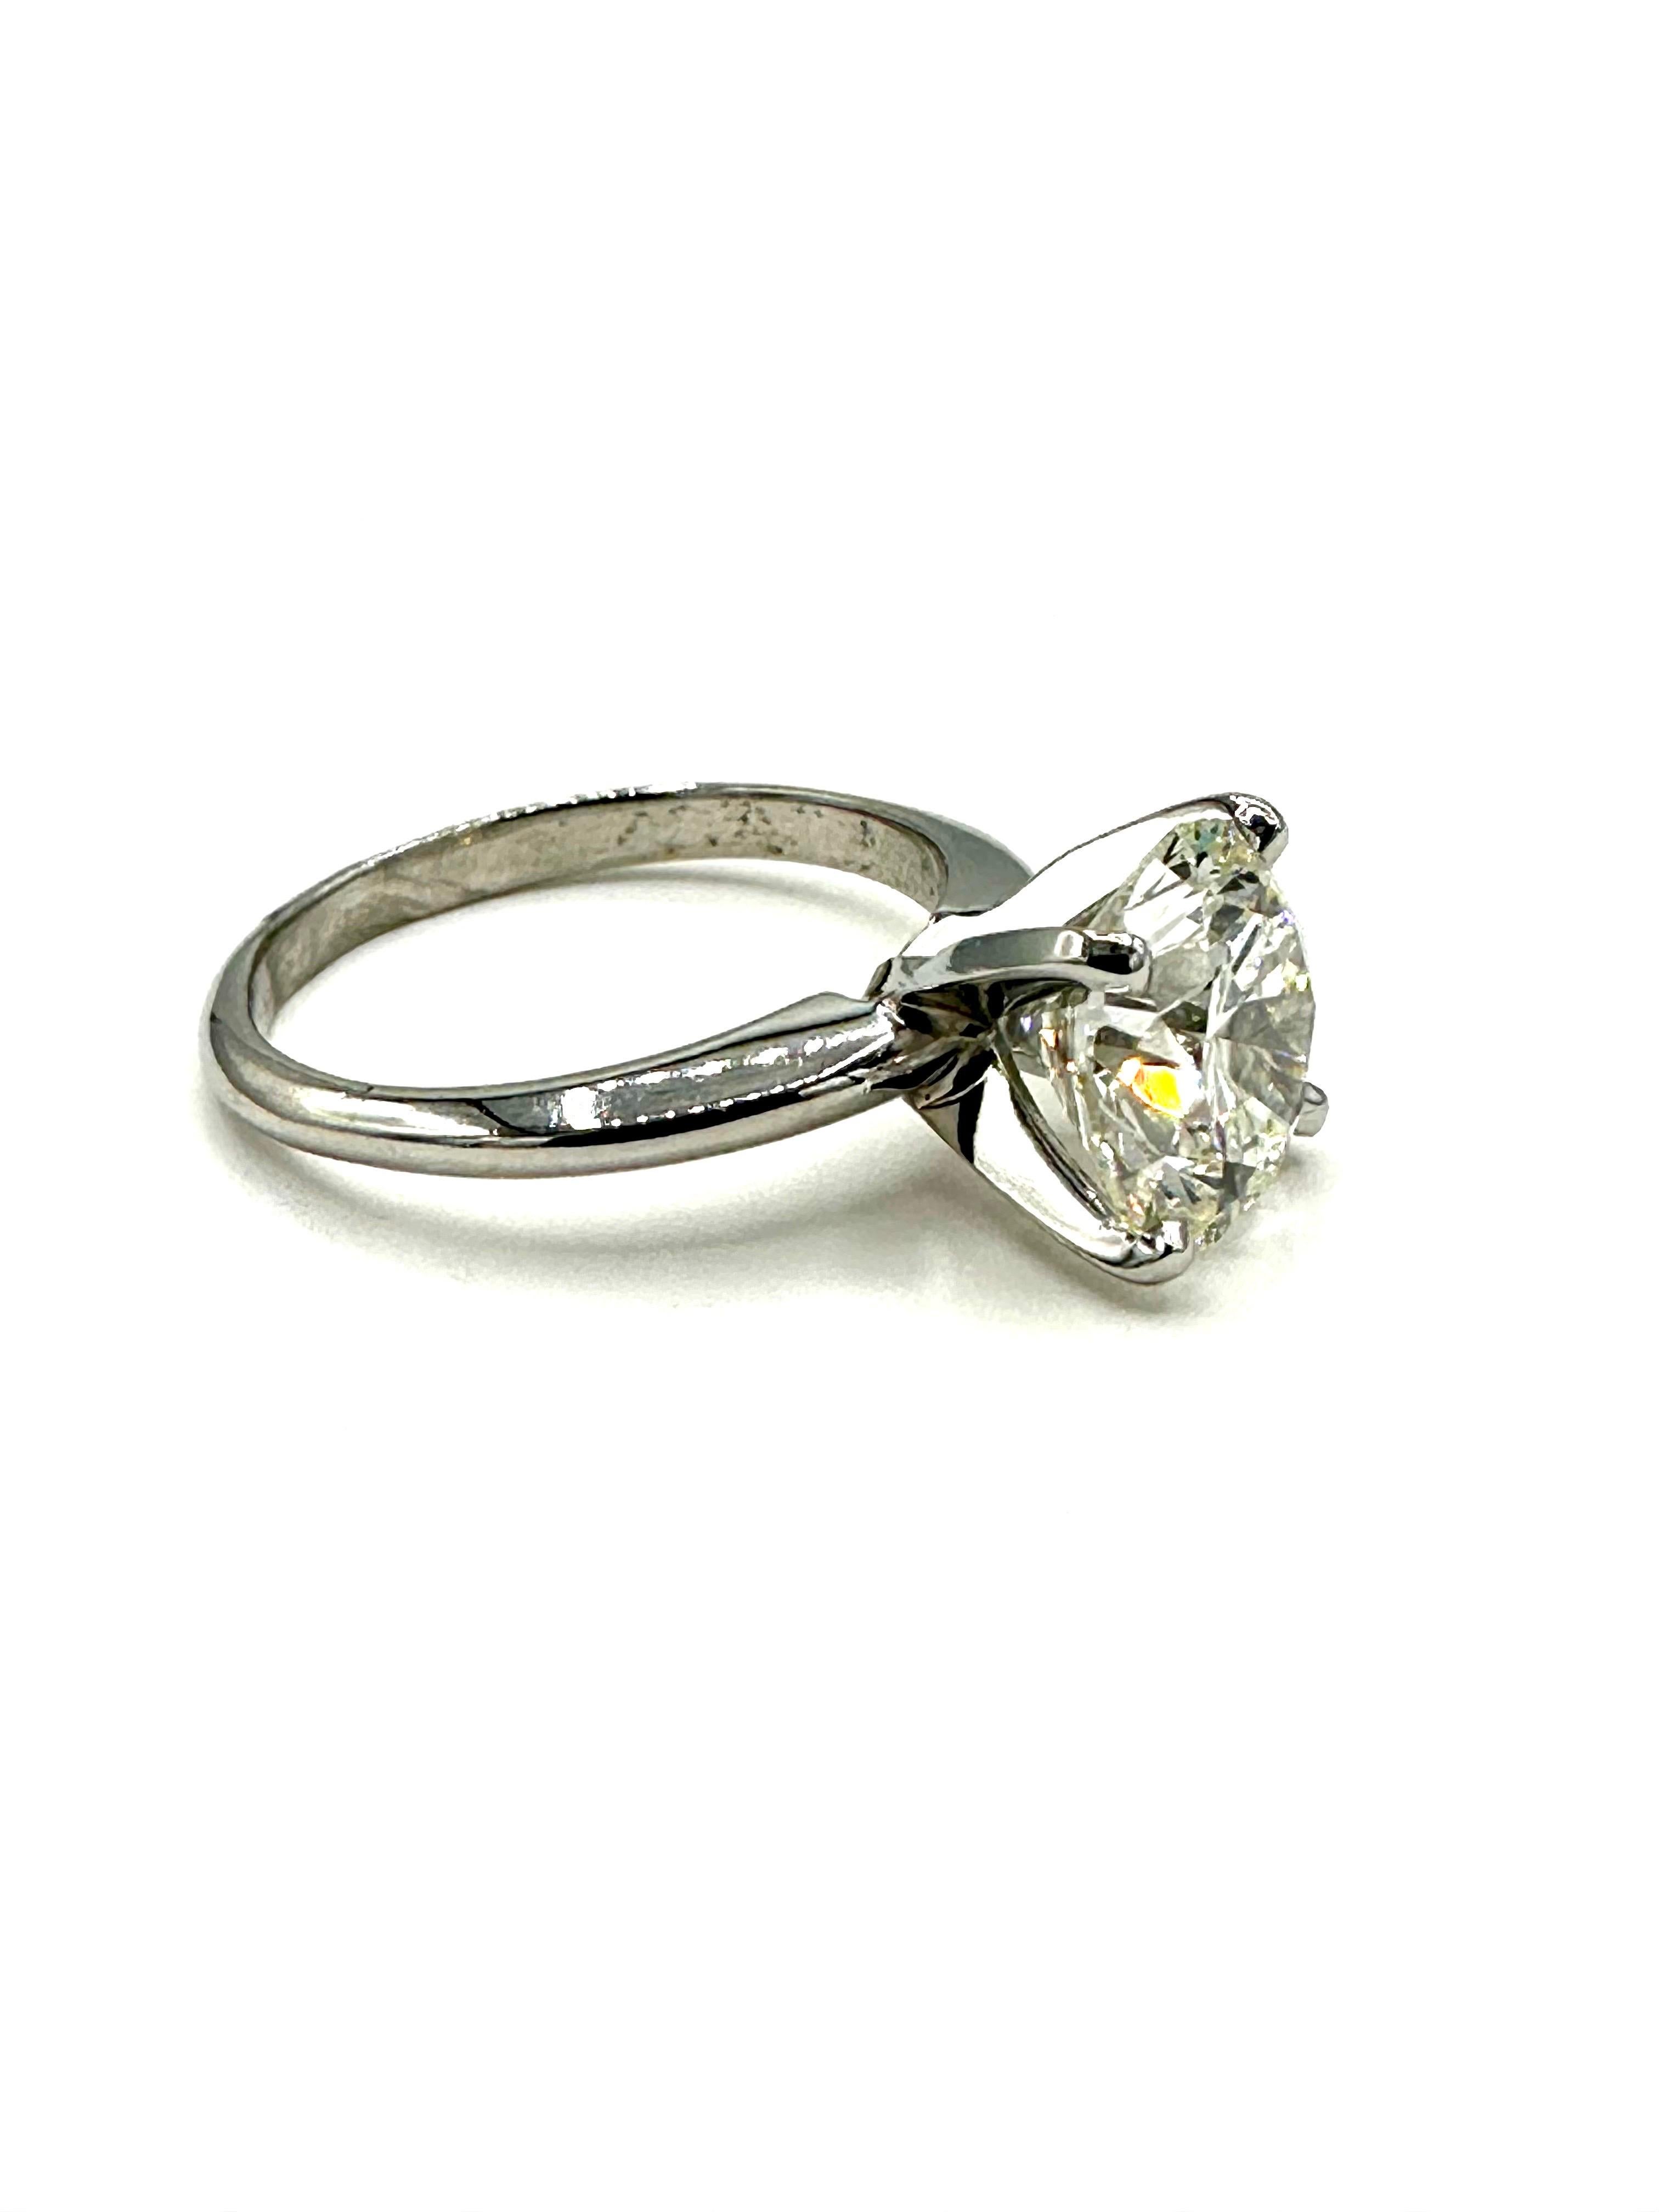 3.10 Carat Round Brilliant Diamond and Platinum Solitaire Engagement Ring In Excellent Condition For Sale In Chevy Chase, MD